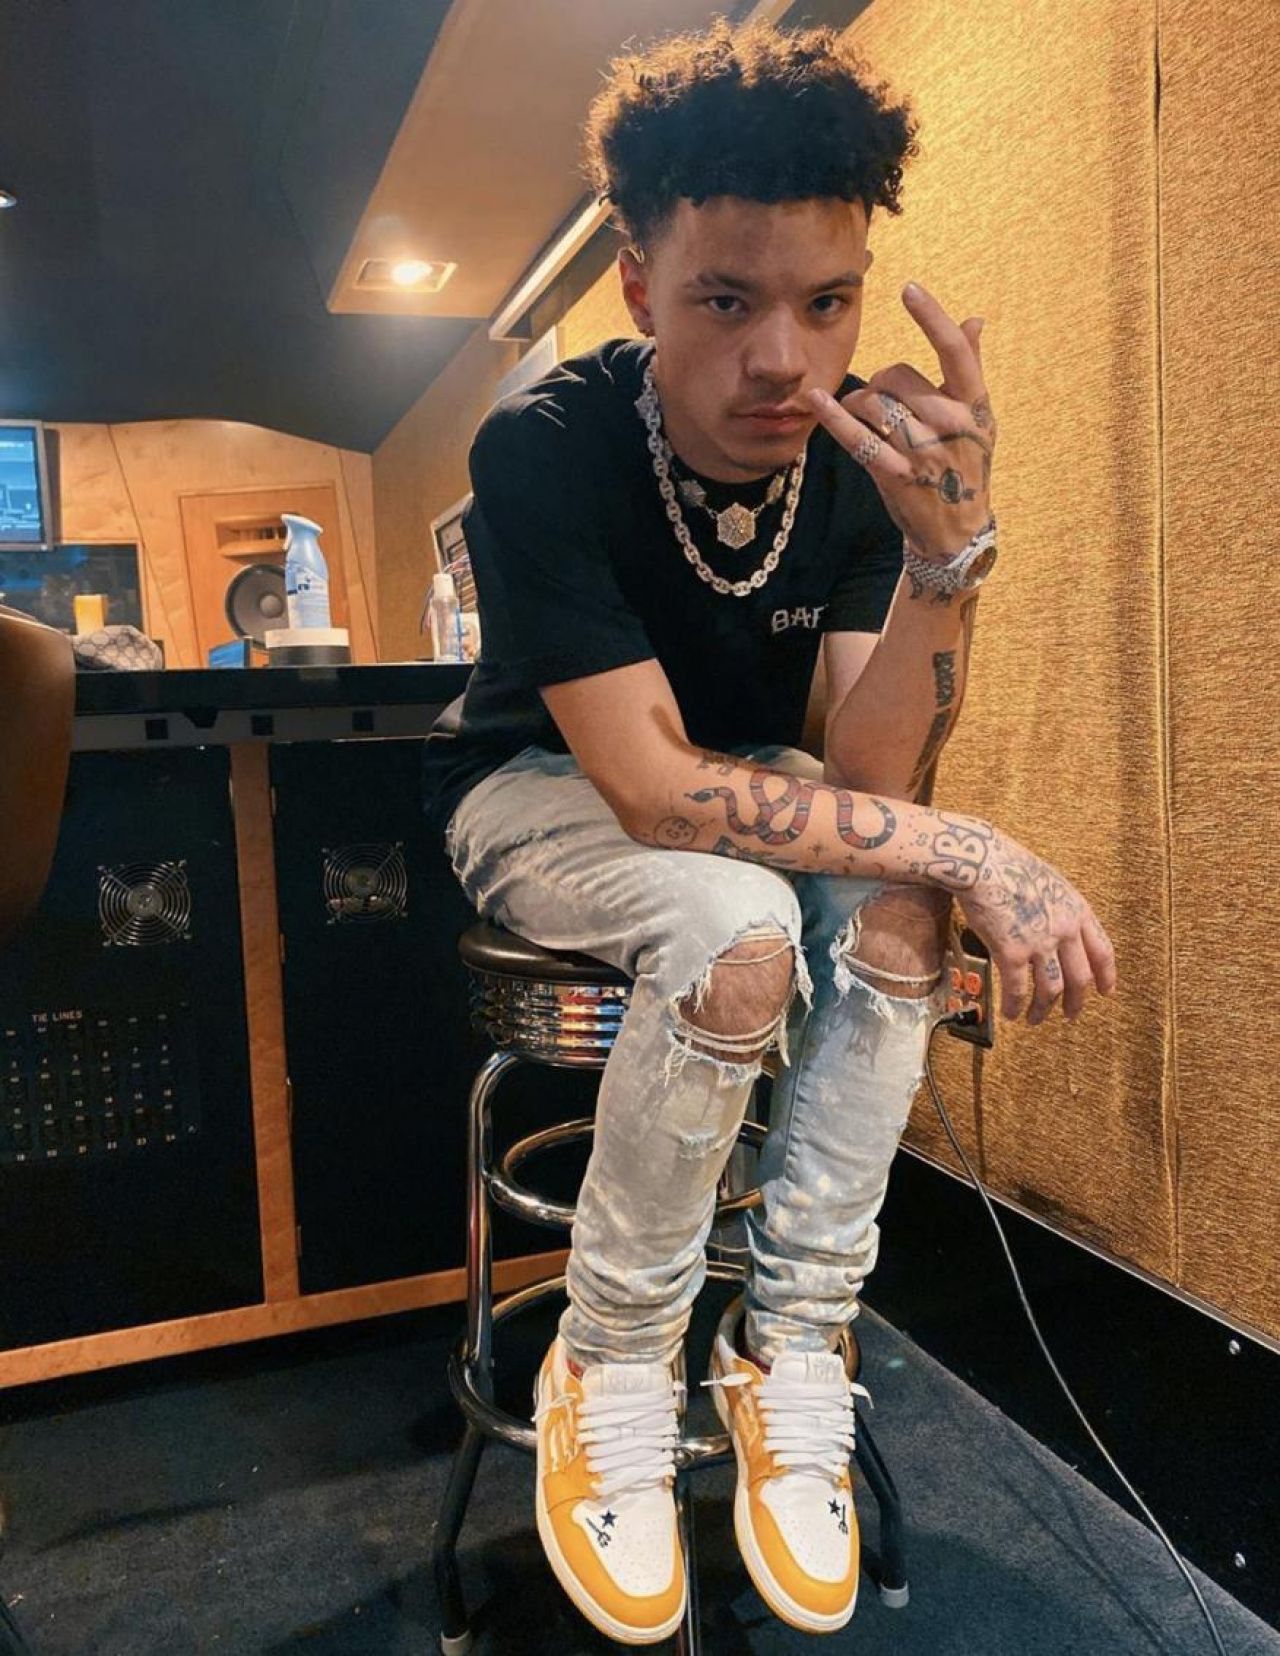 Yellow shoes worn by Lil Mosey on his Instagram account @lilmosey.